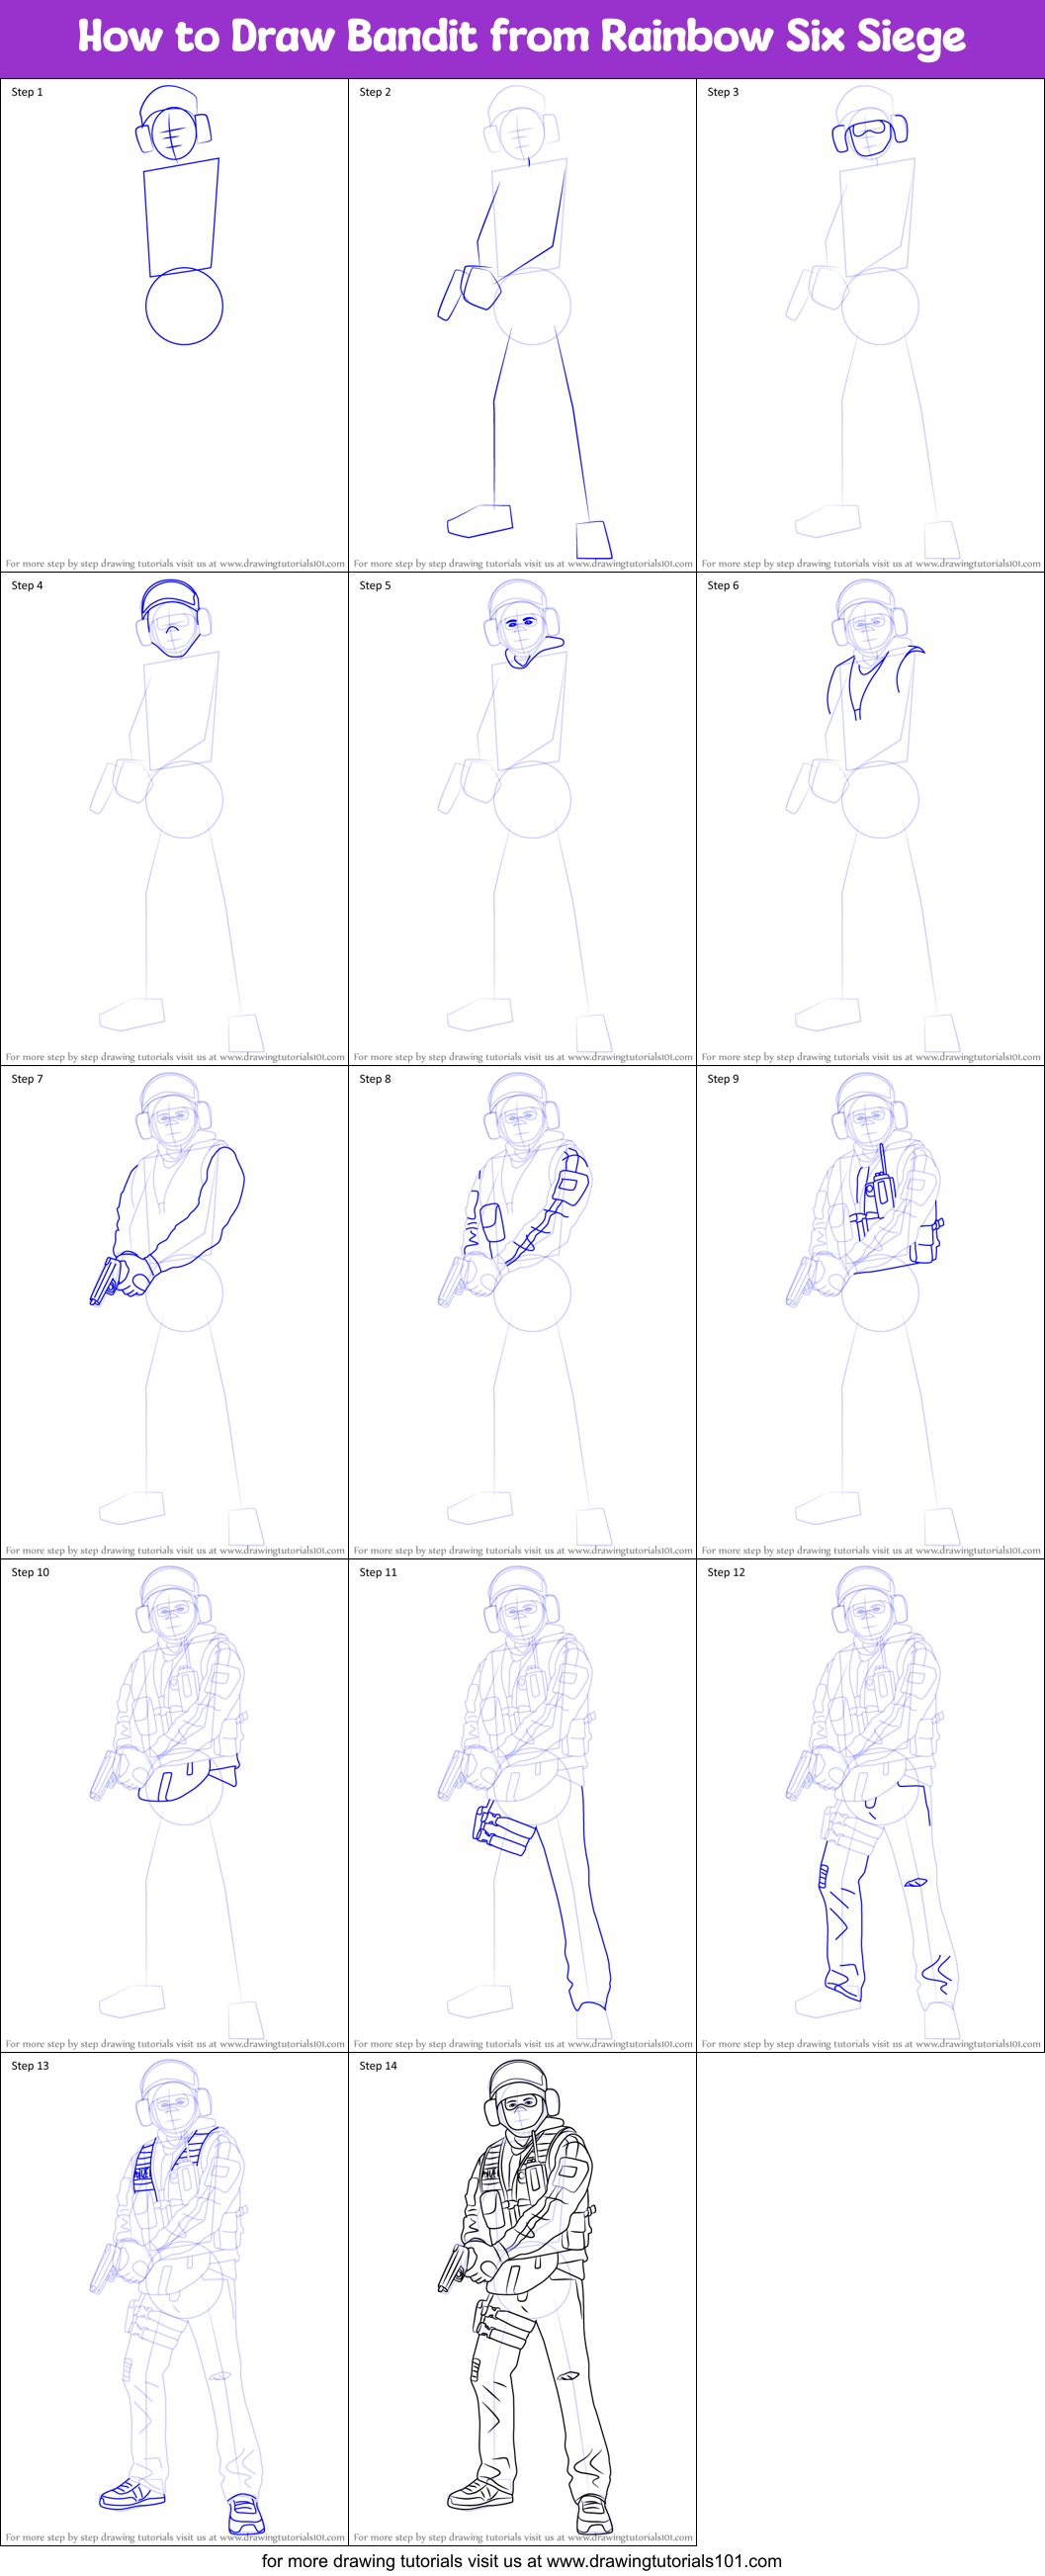 How to Draw Bandit from Rainbow Six Siege printable step by step